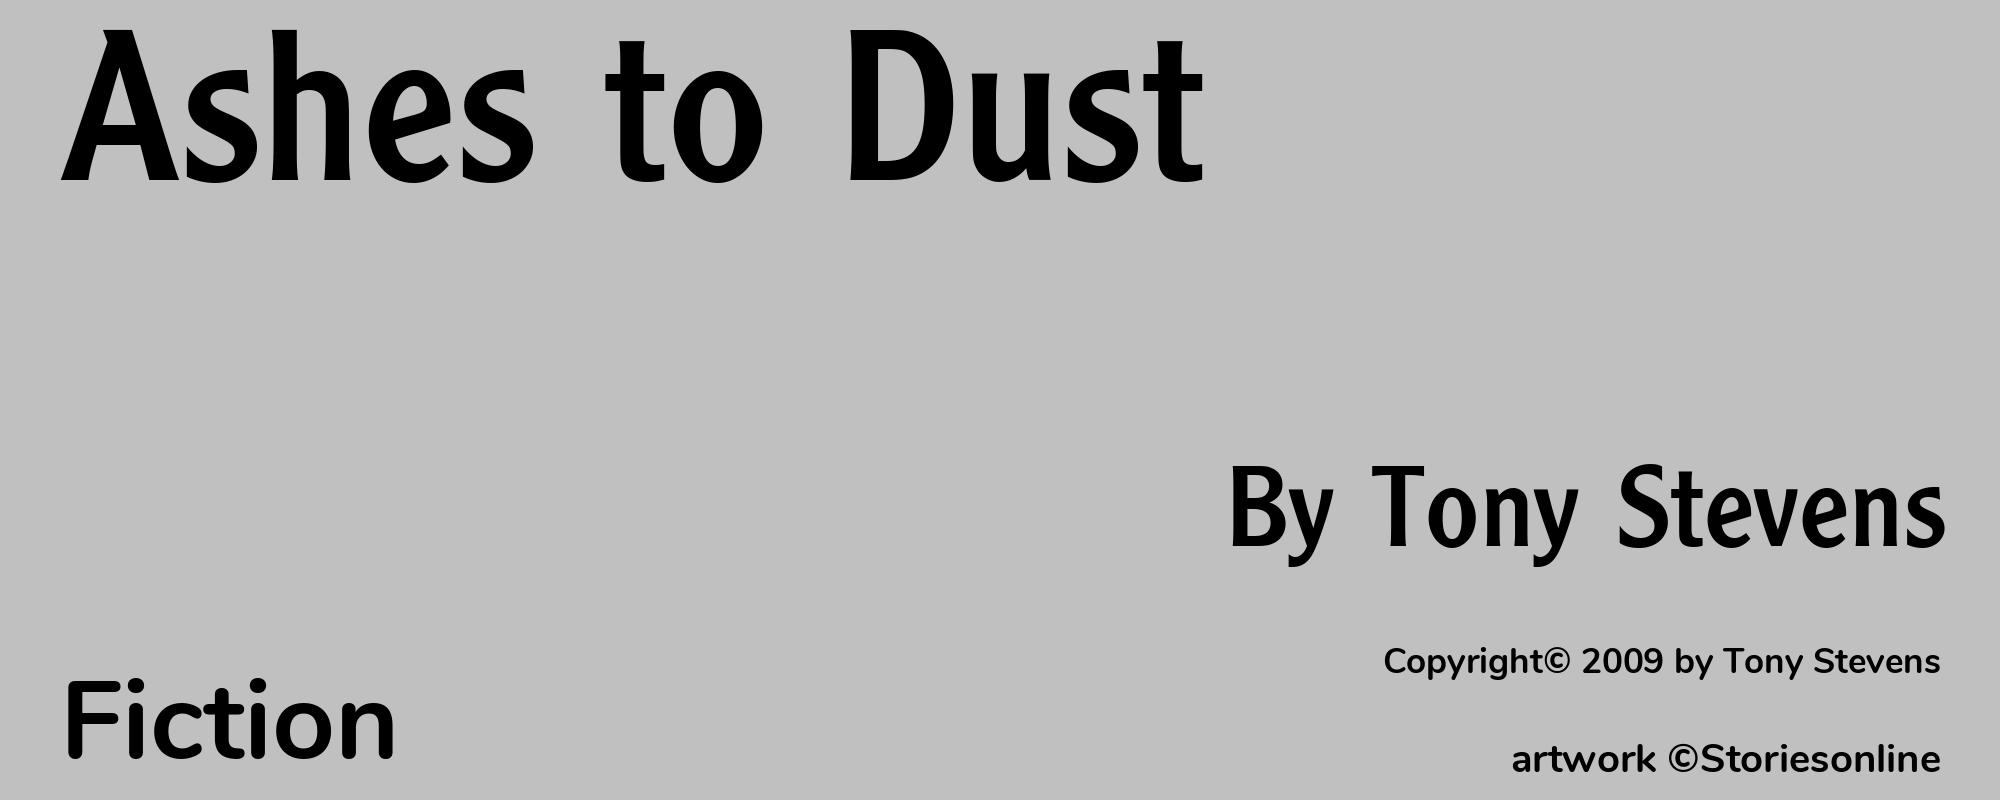 Ashes to Dust - Cover